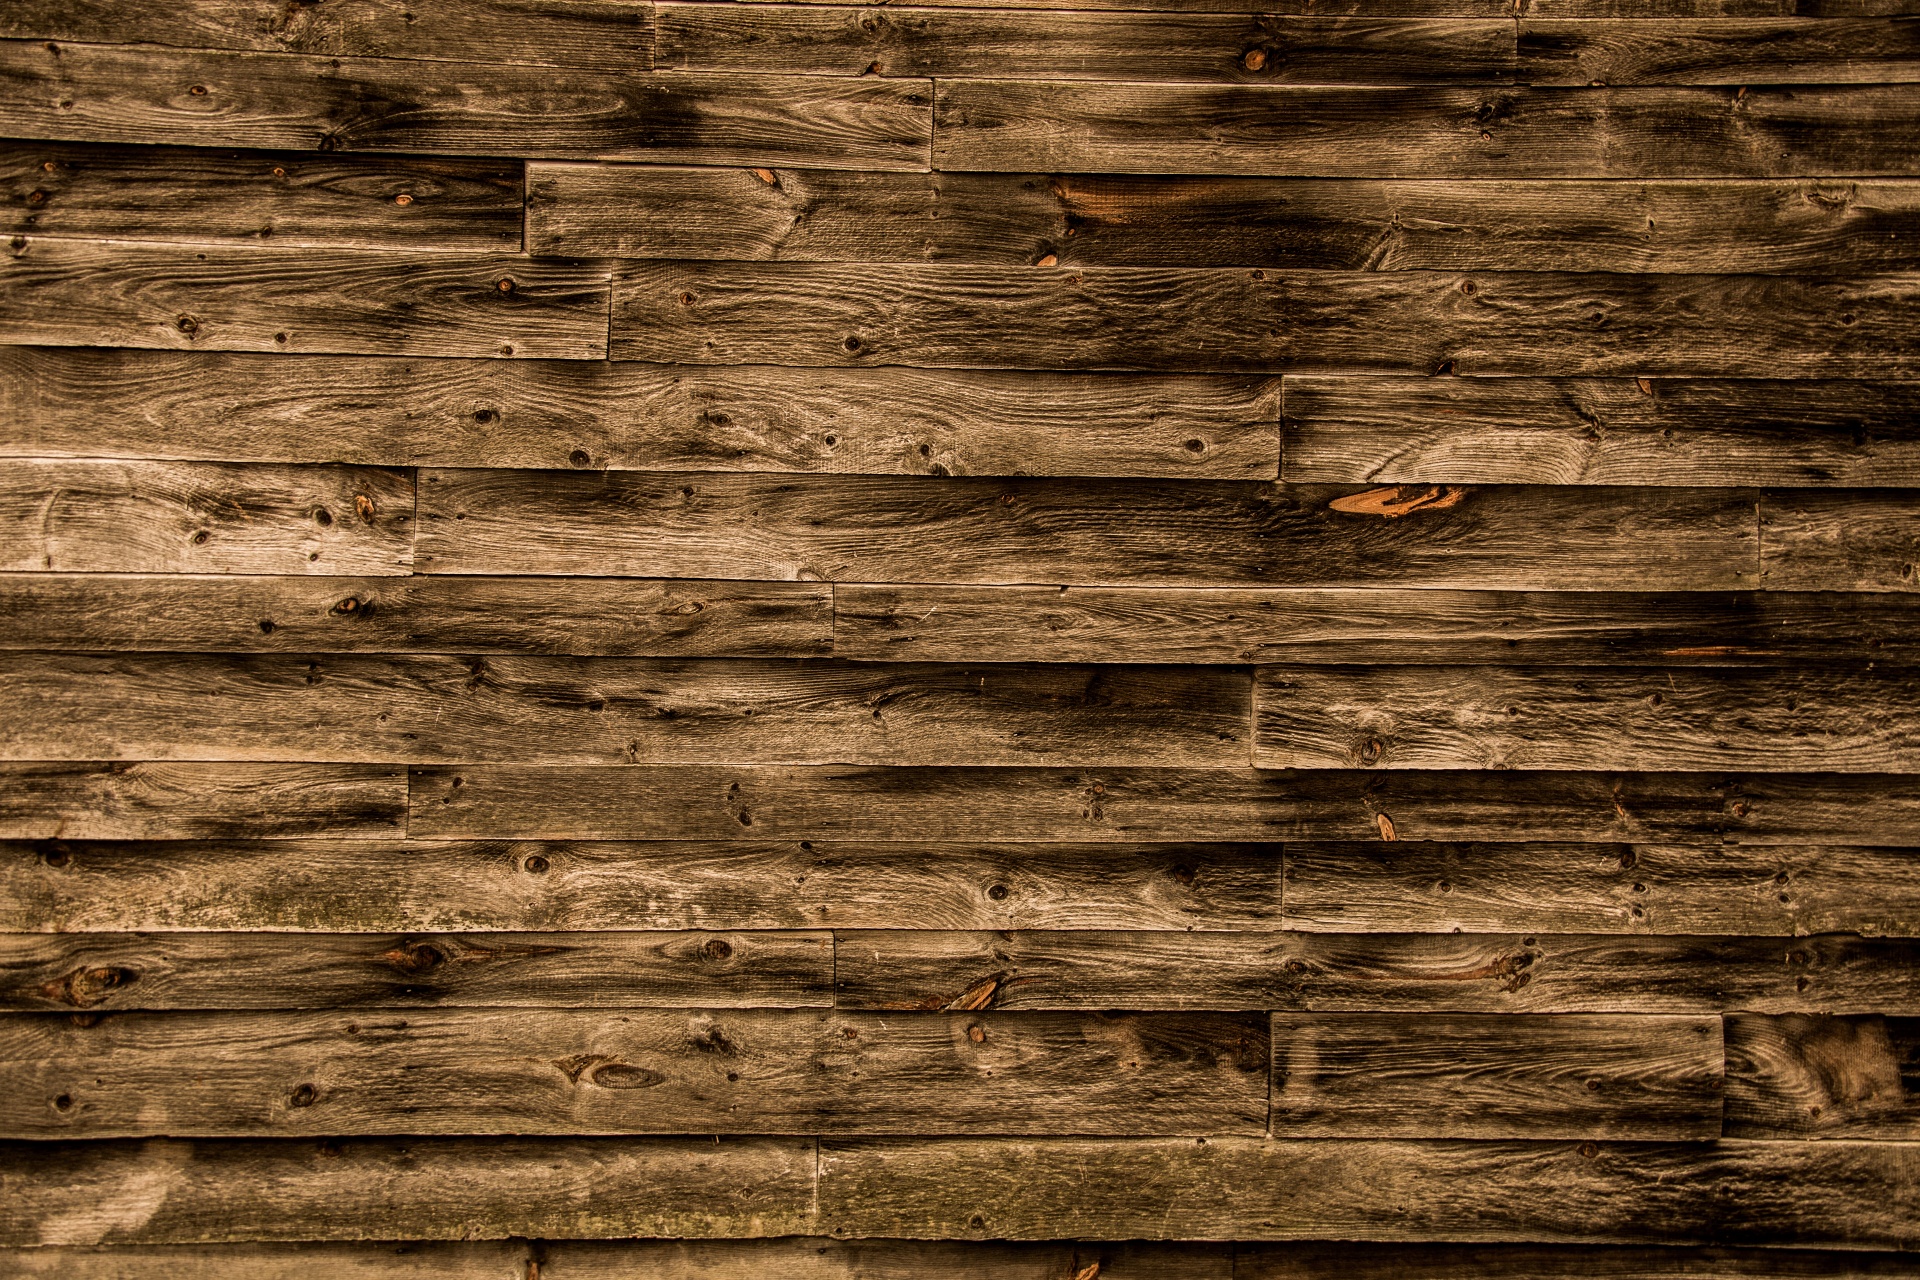 Wooden Background Free Stock Photo - Public Domain Pictures